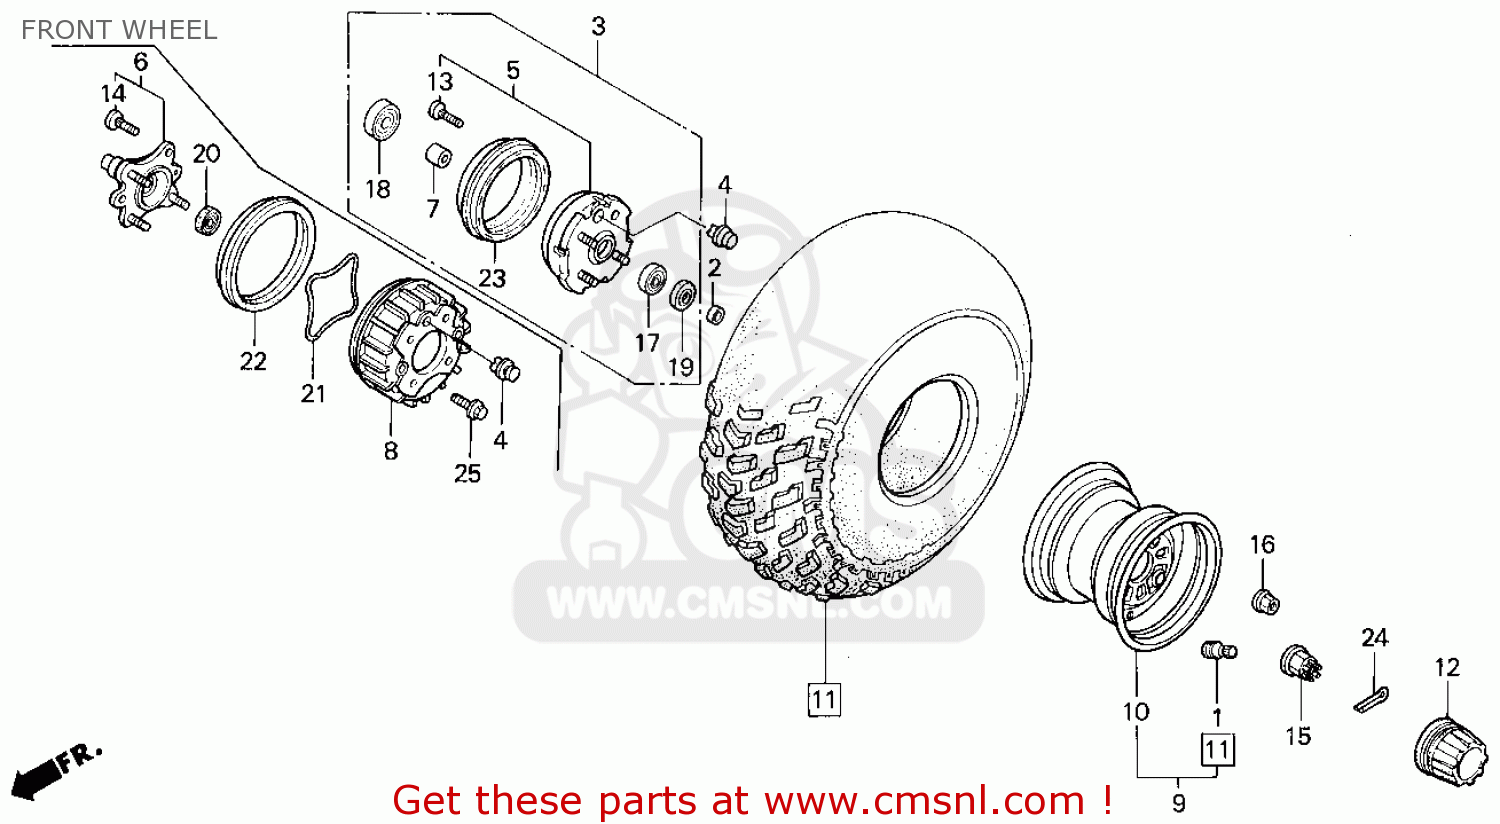 Parts for a 1995 honda fourtrax #2